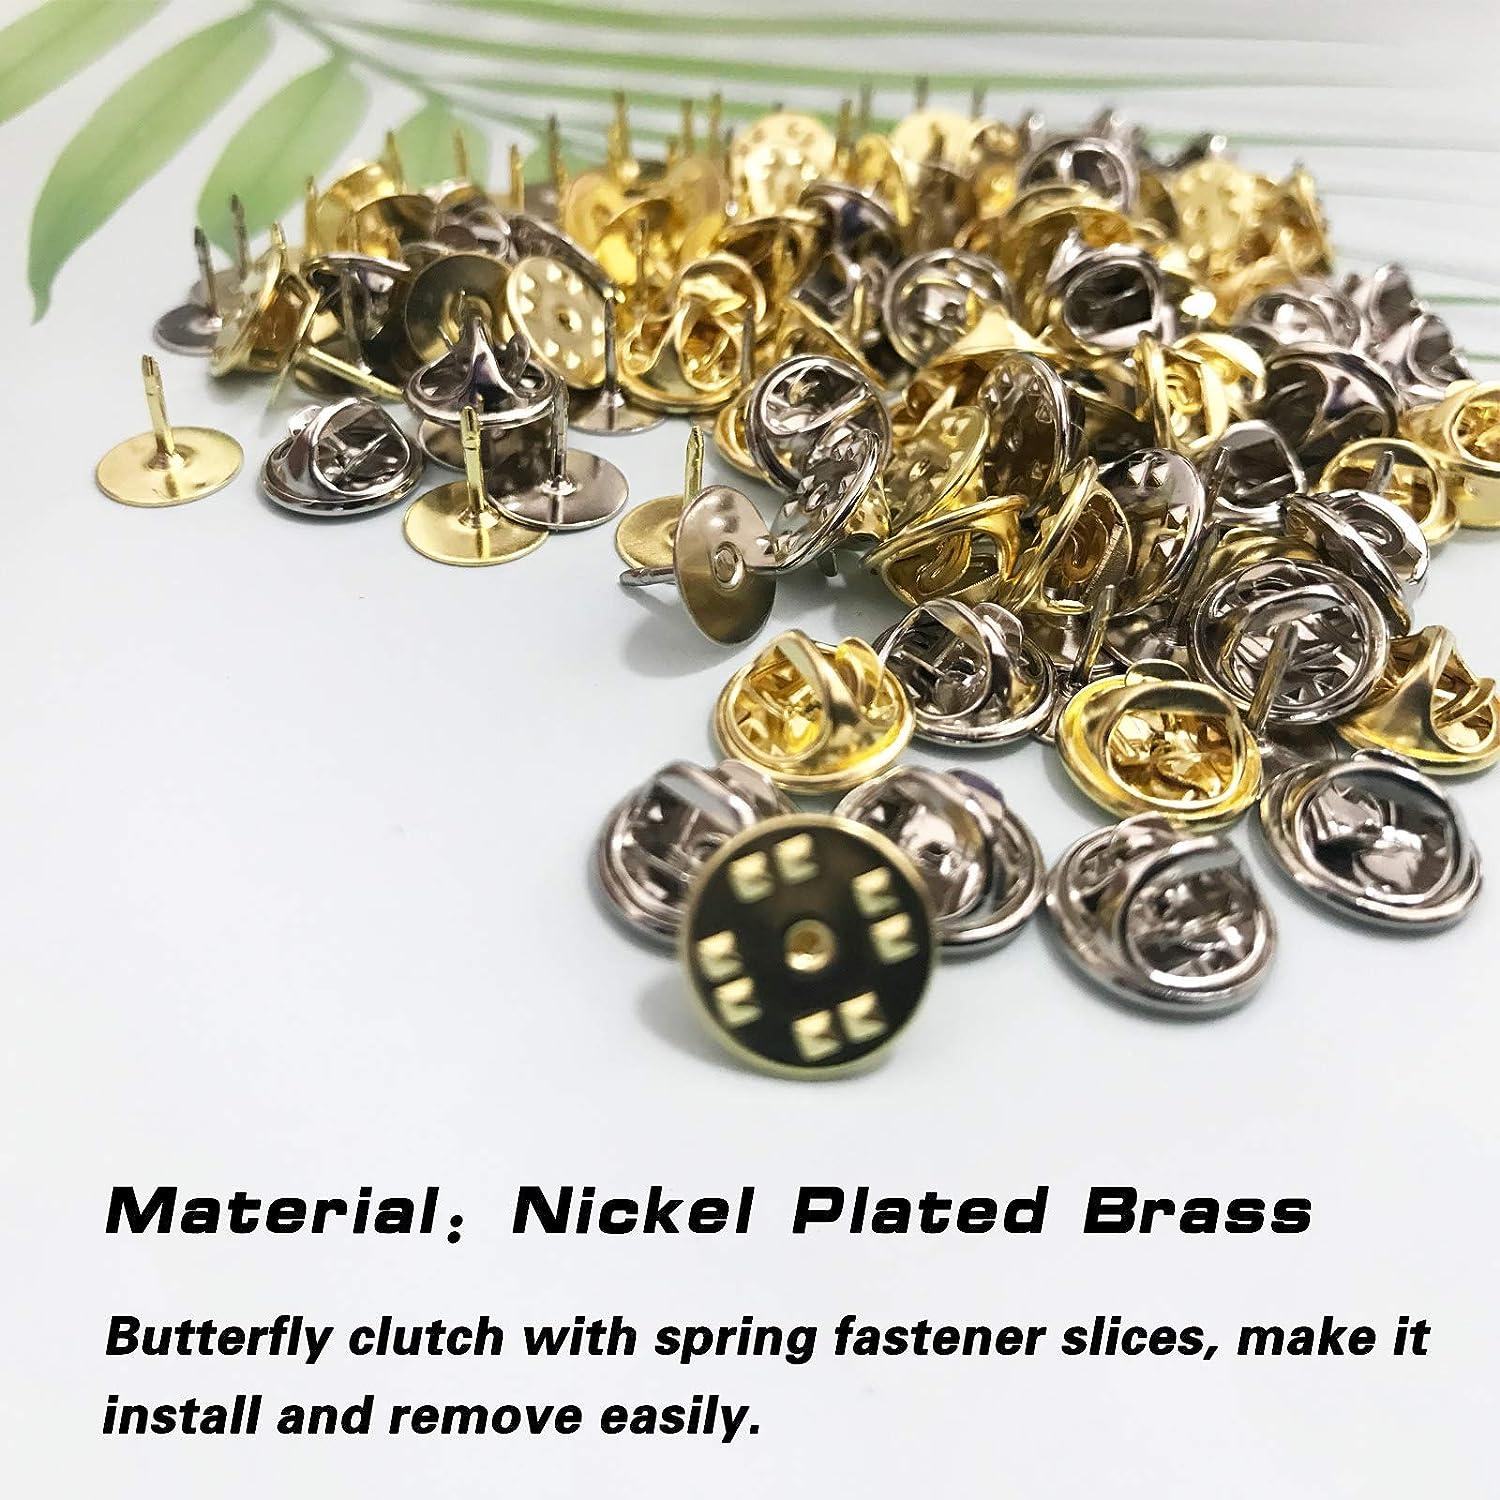 100 Brass Butterfly Clutch Pin Backs for Pins (Boxed)